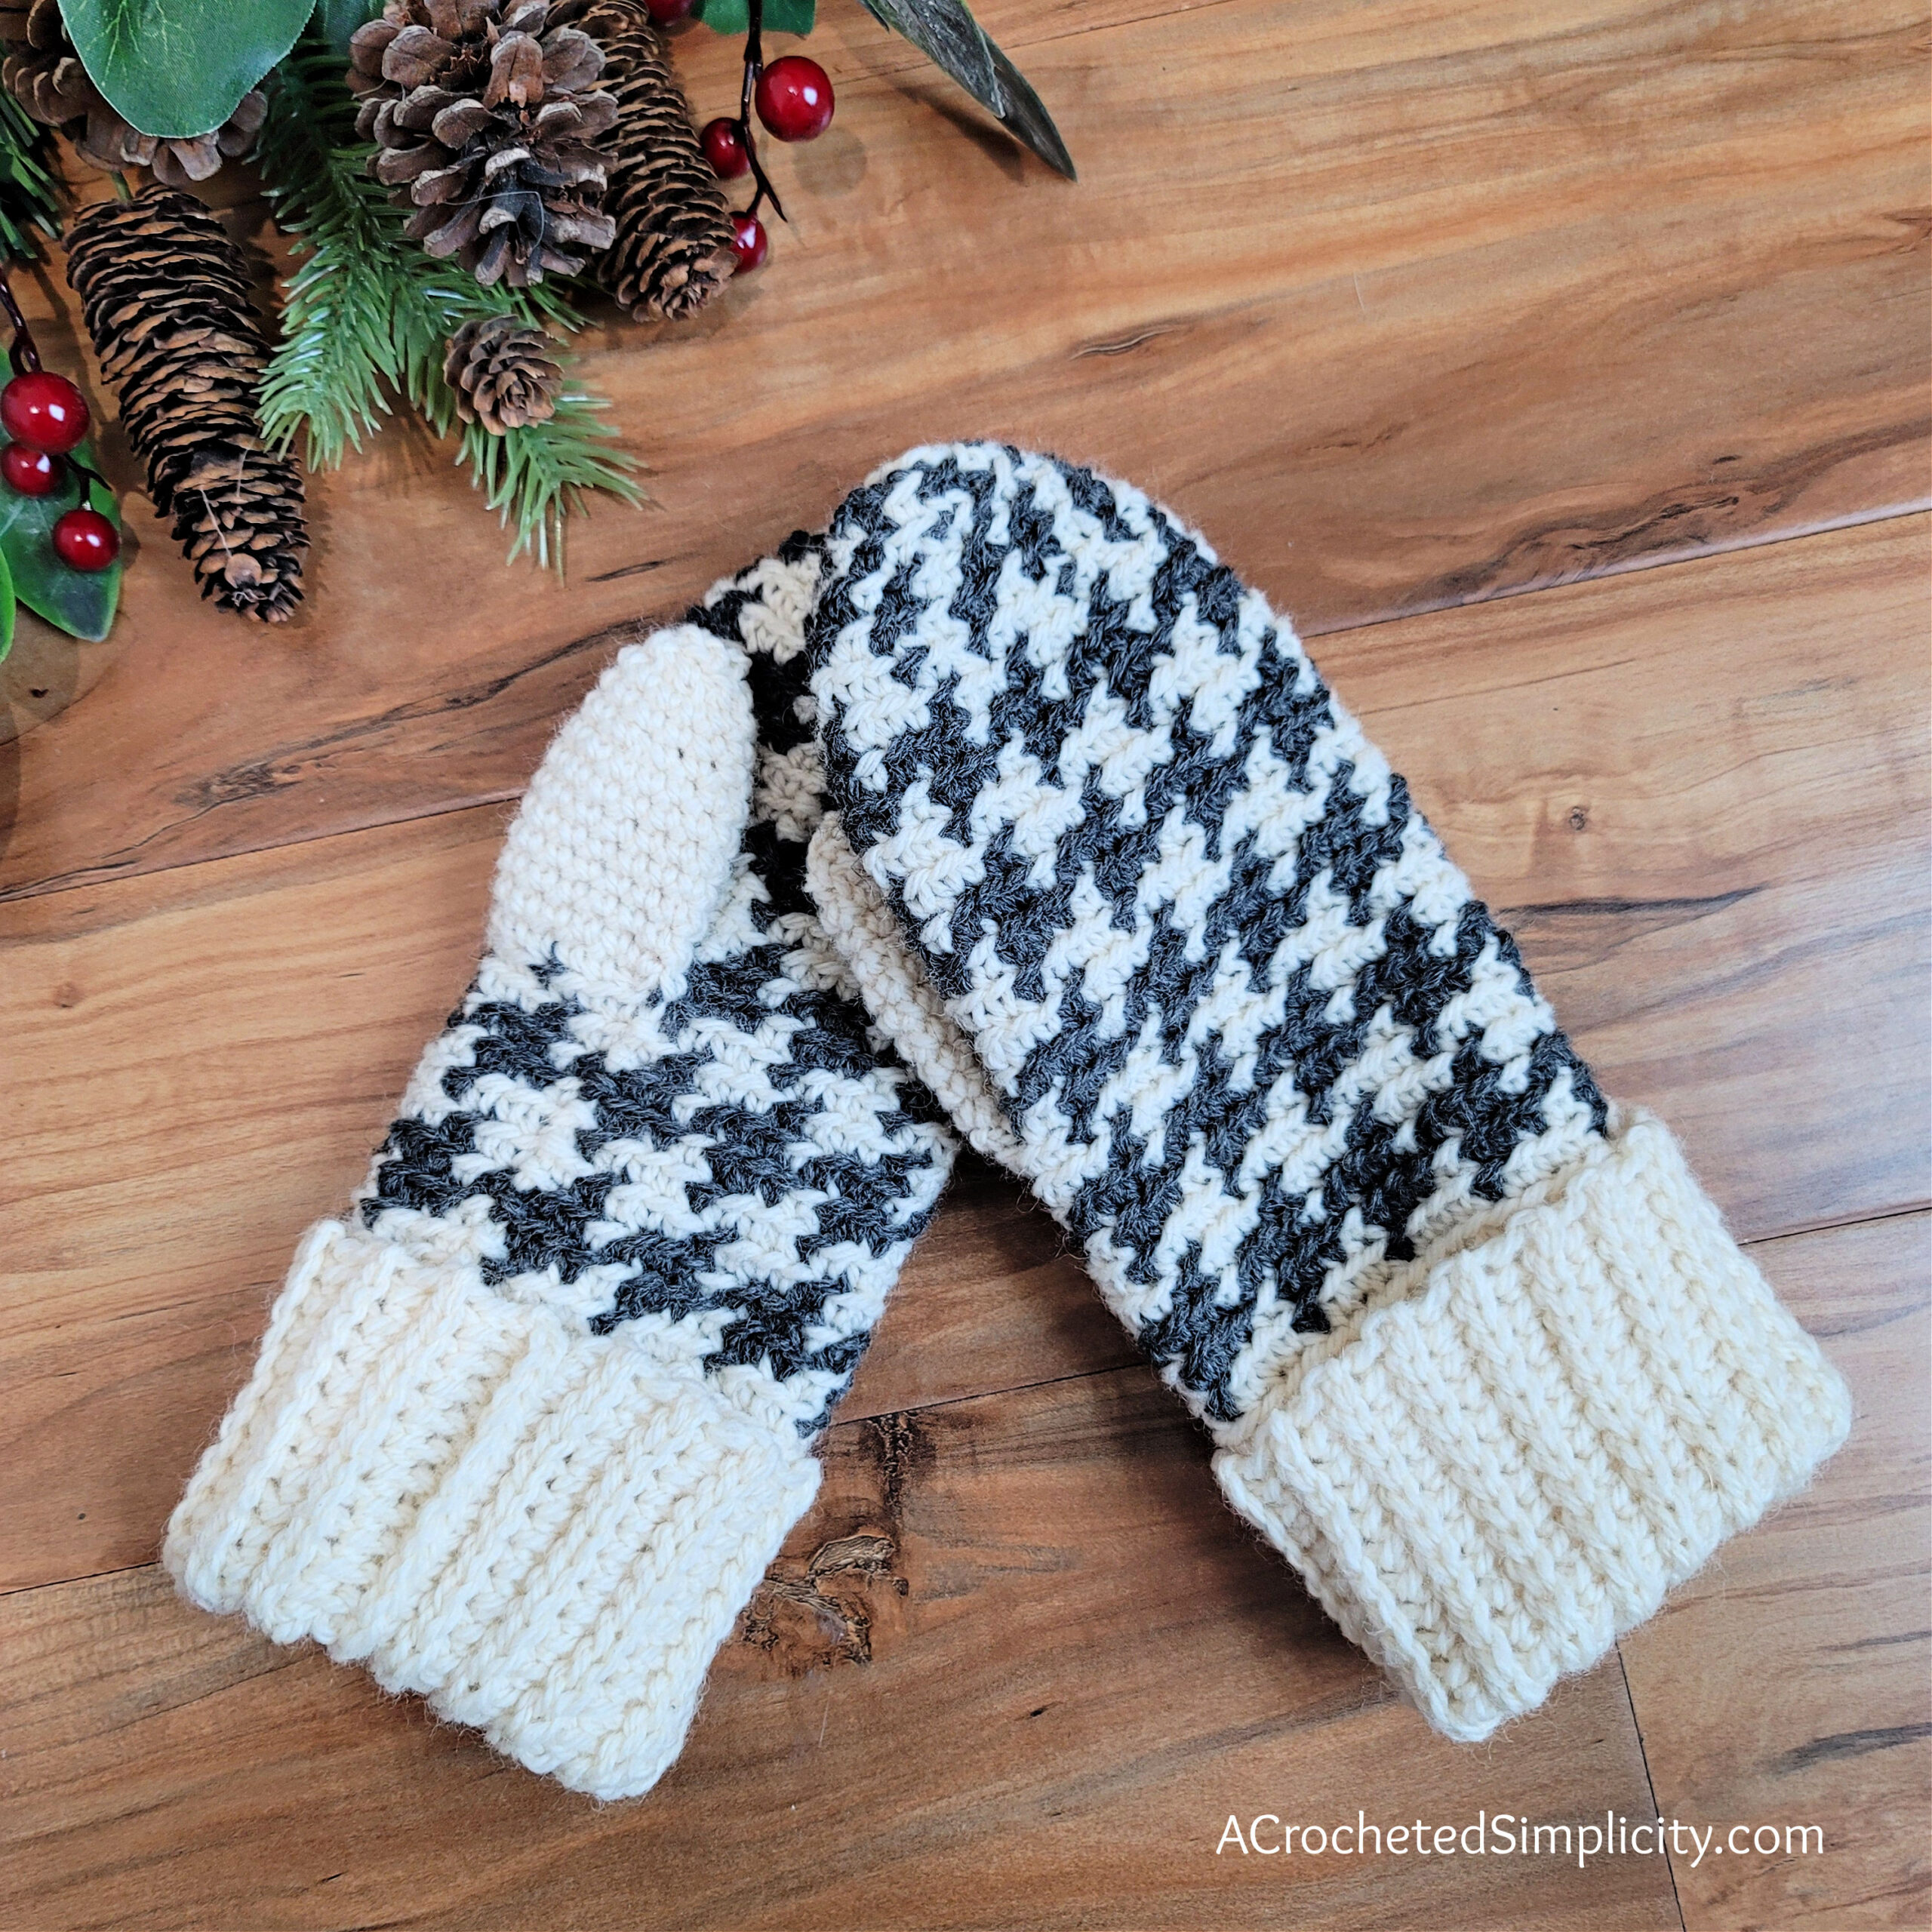 Cream and charcoal grey houndstooth crochet mittens laying on wood floor.